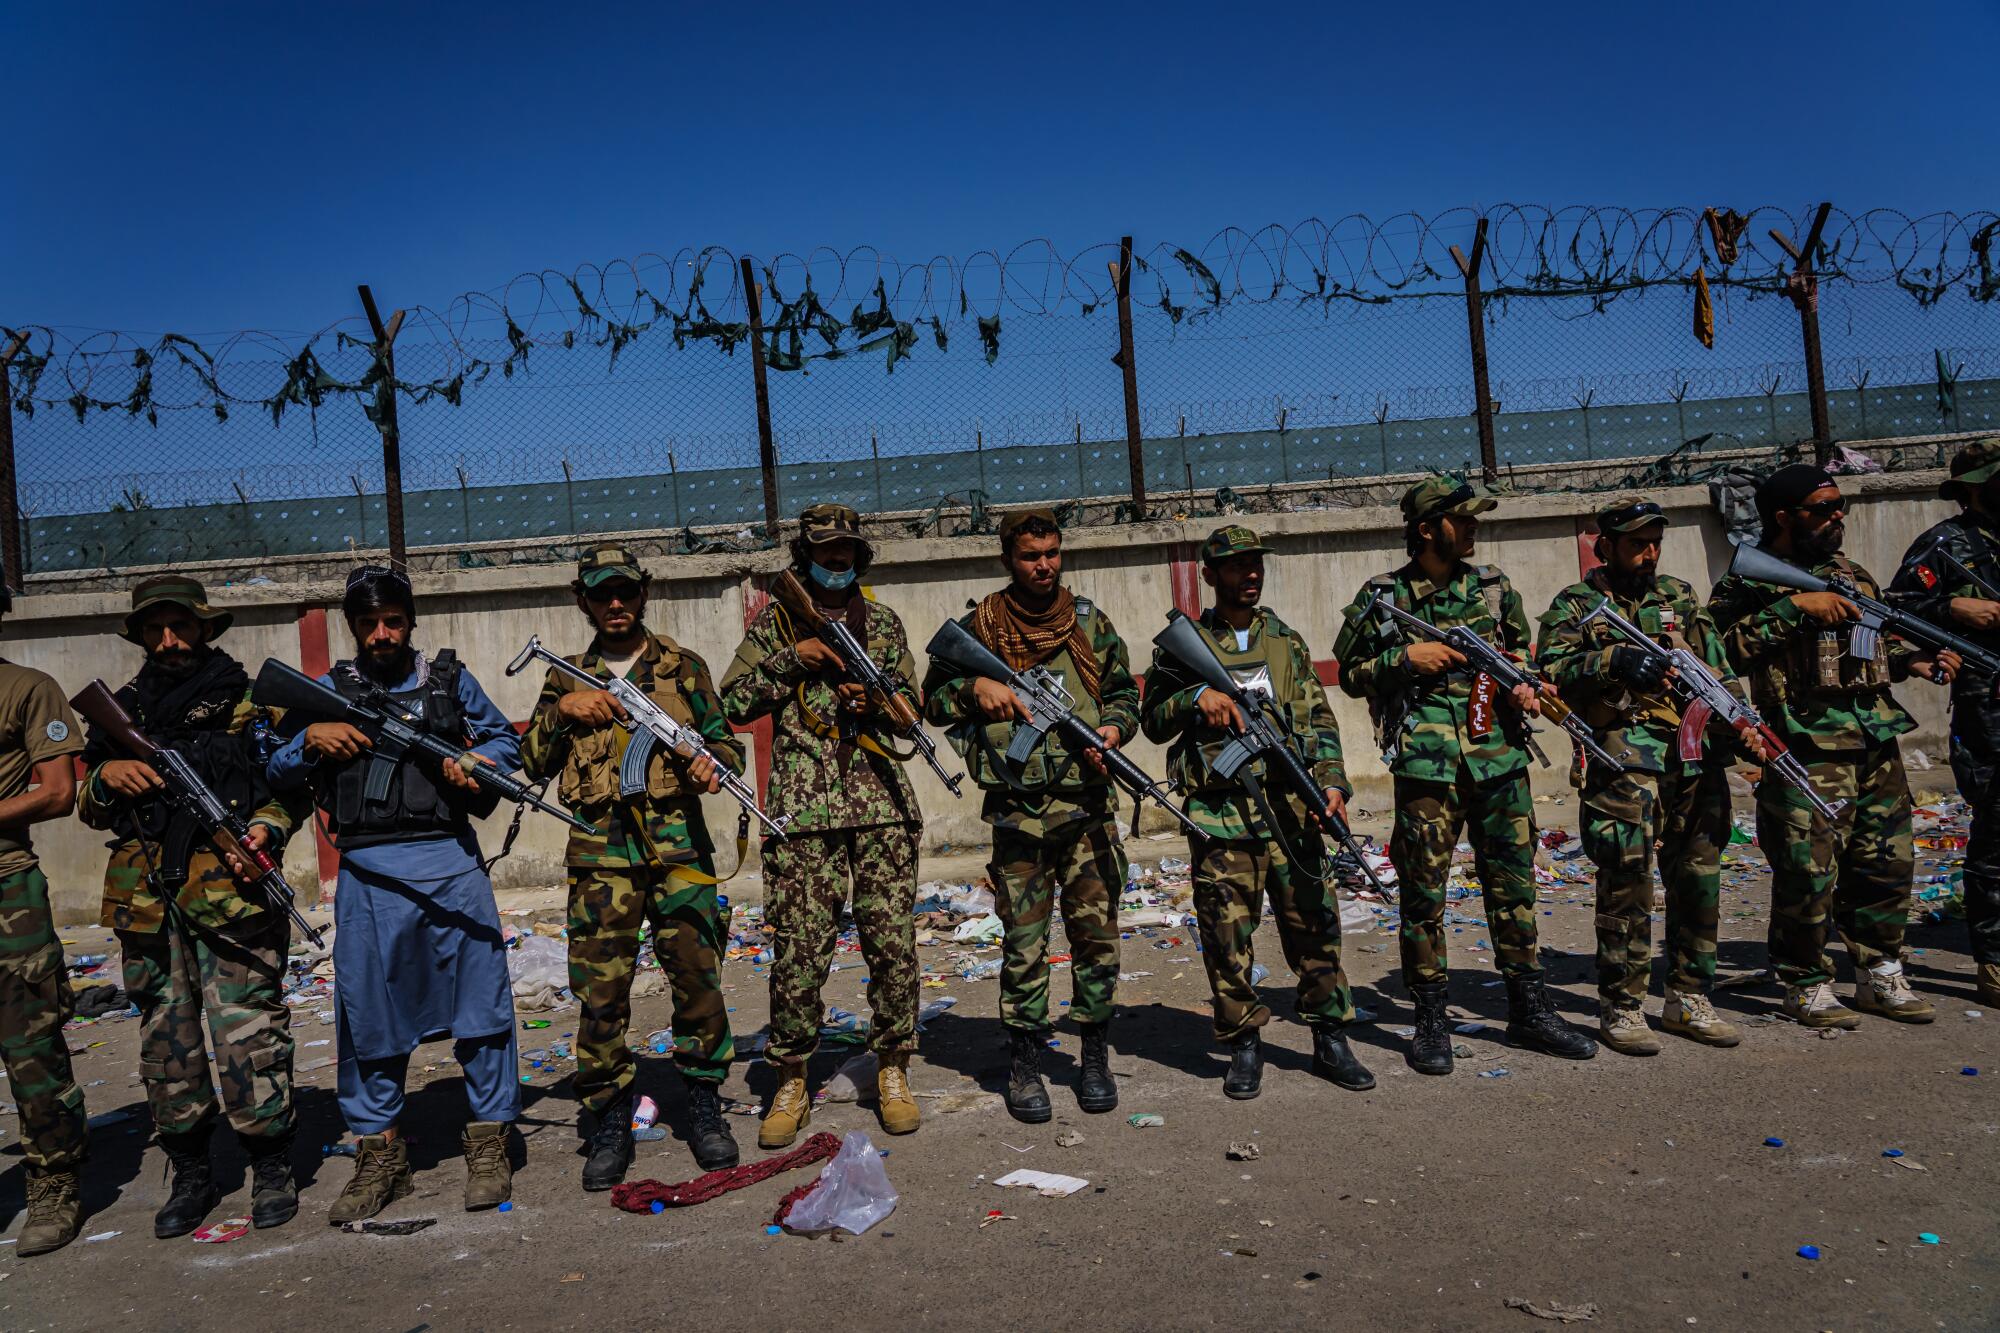 Taliban fighters line up with rifles in front of a fence